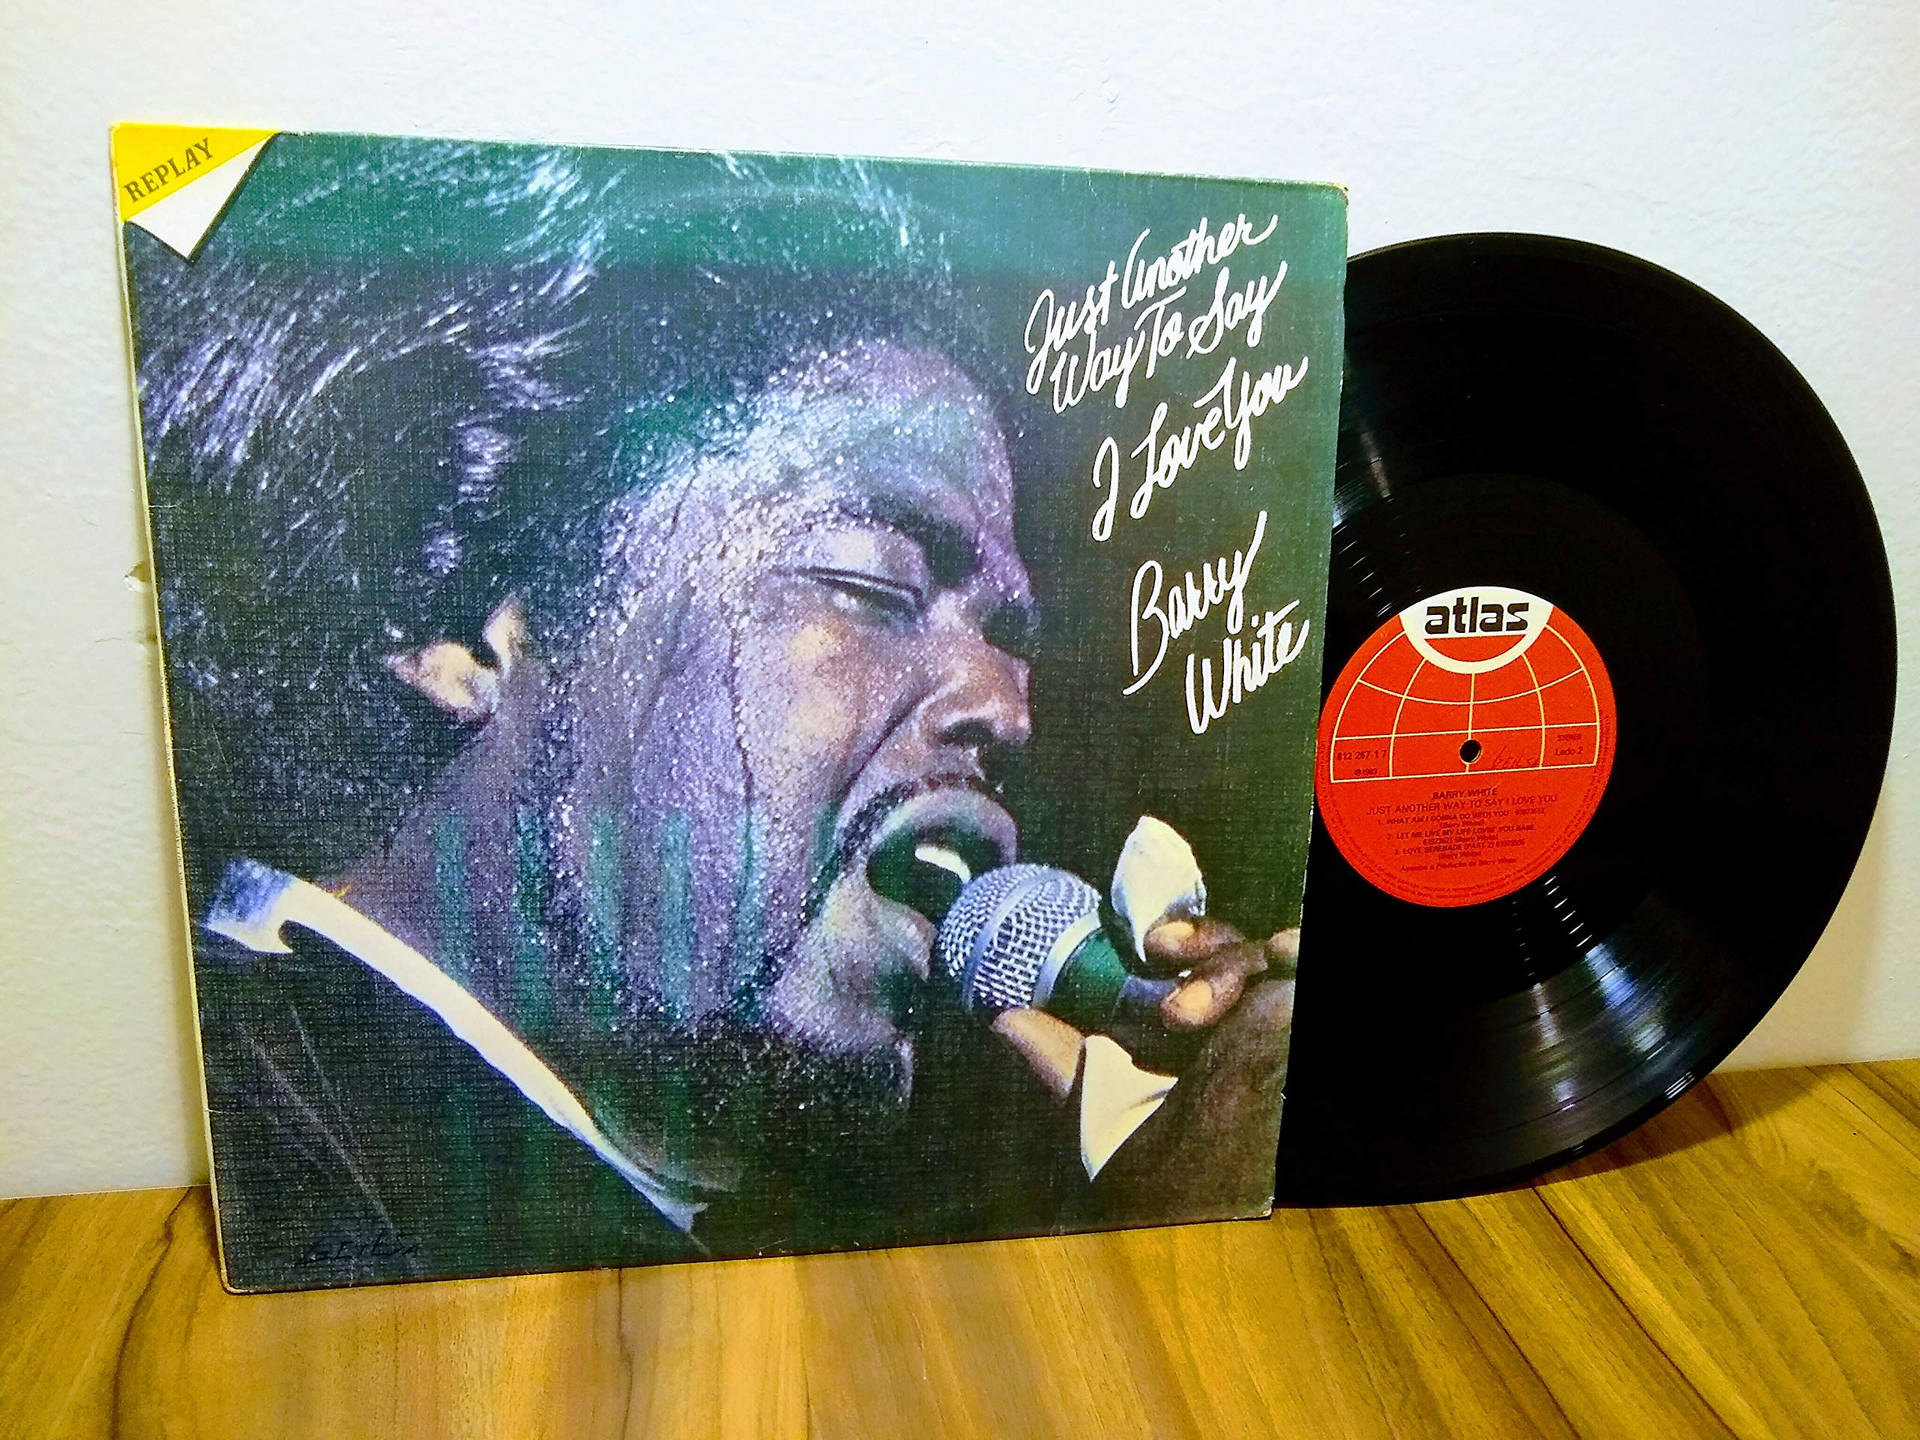 Barrywhite Vinyl Record-album. (note: There Is Not Really A Contextual Connection To Computer Or Mobile Wallpaper In This Phrase, So It Is Difficult To Provide A More Detailed Translation. However, The Basic Meaning Is 